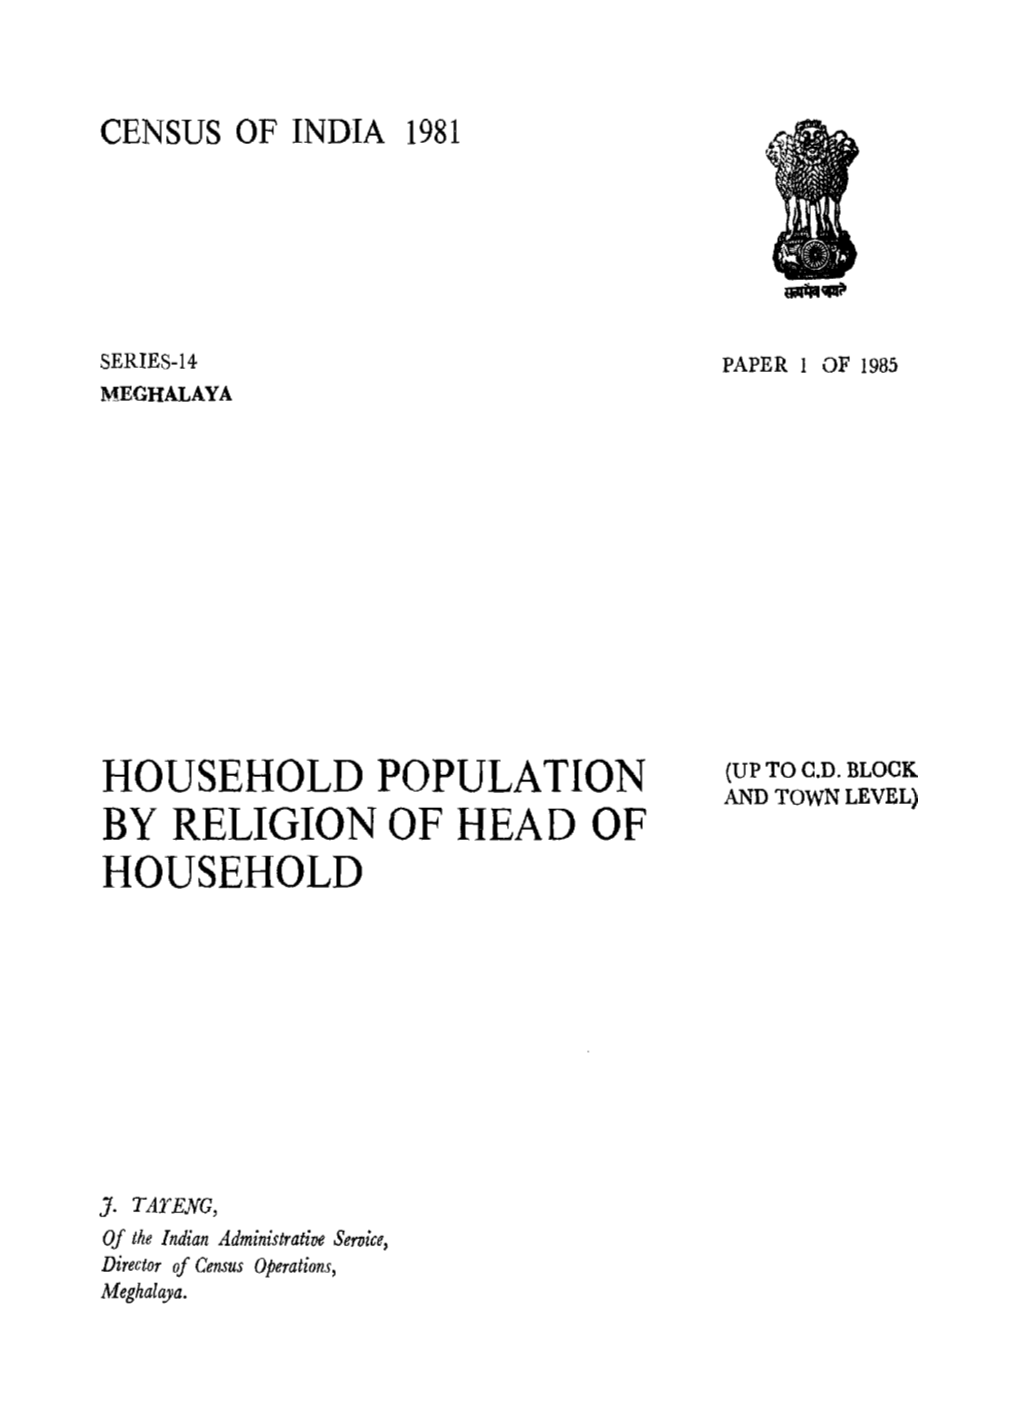 Household Population by Religion of Head of Household, Series-14